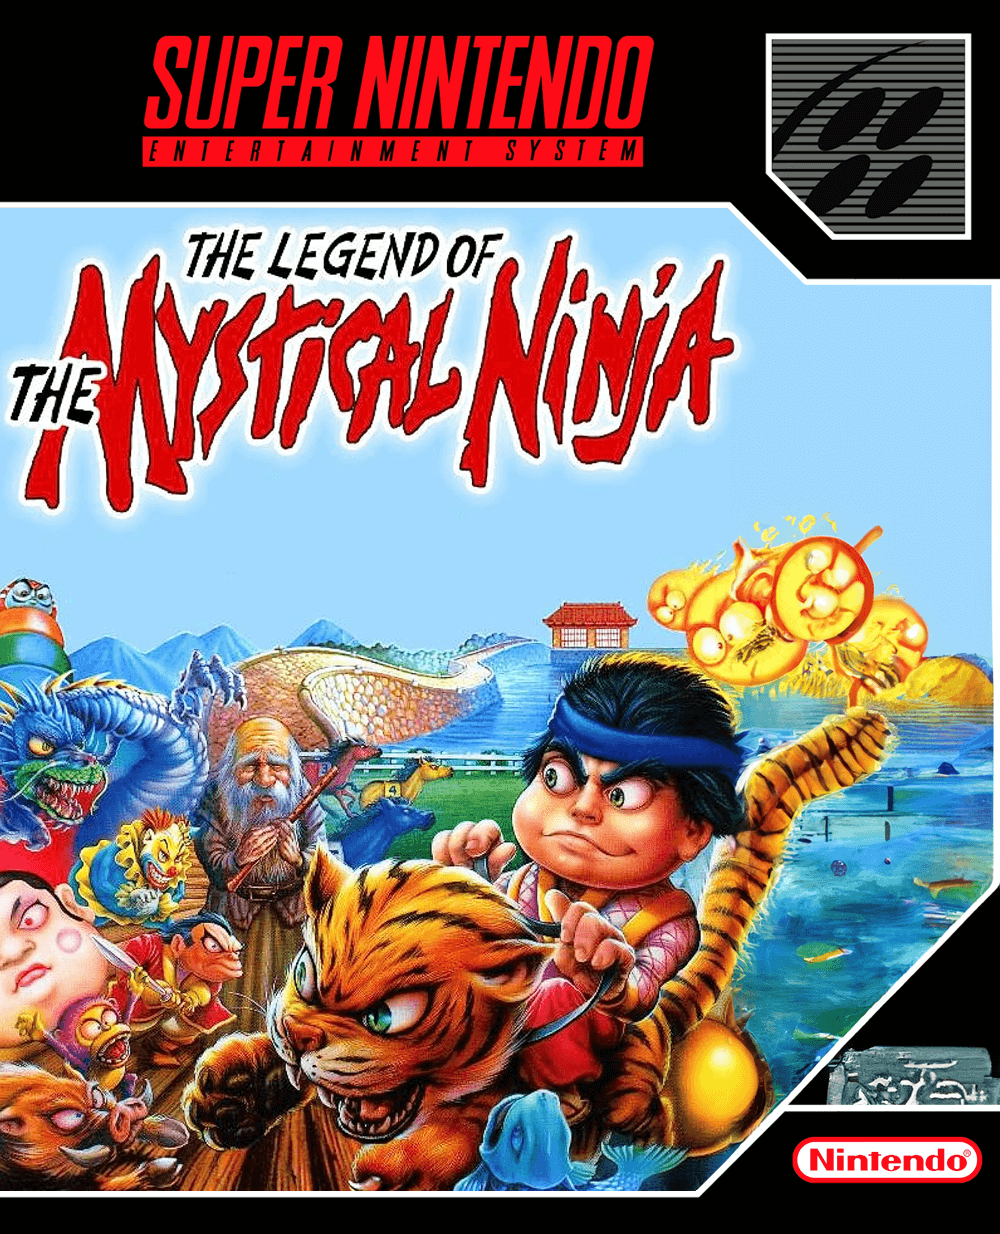 The Legend of the Mystical Ninja - Play game online